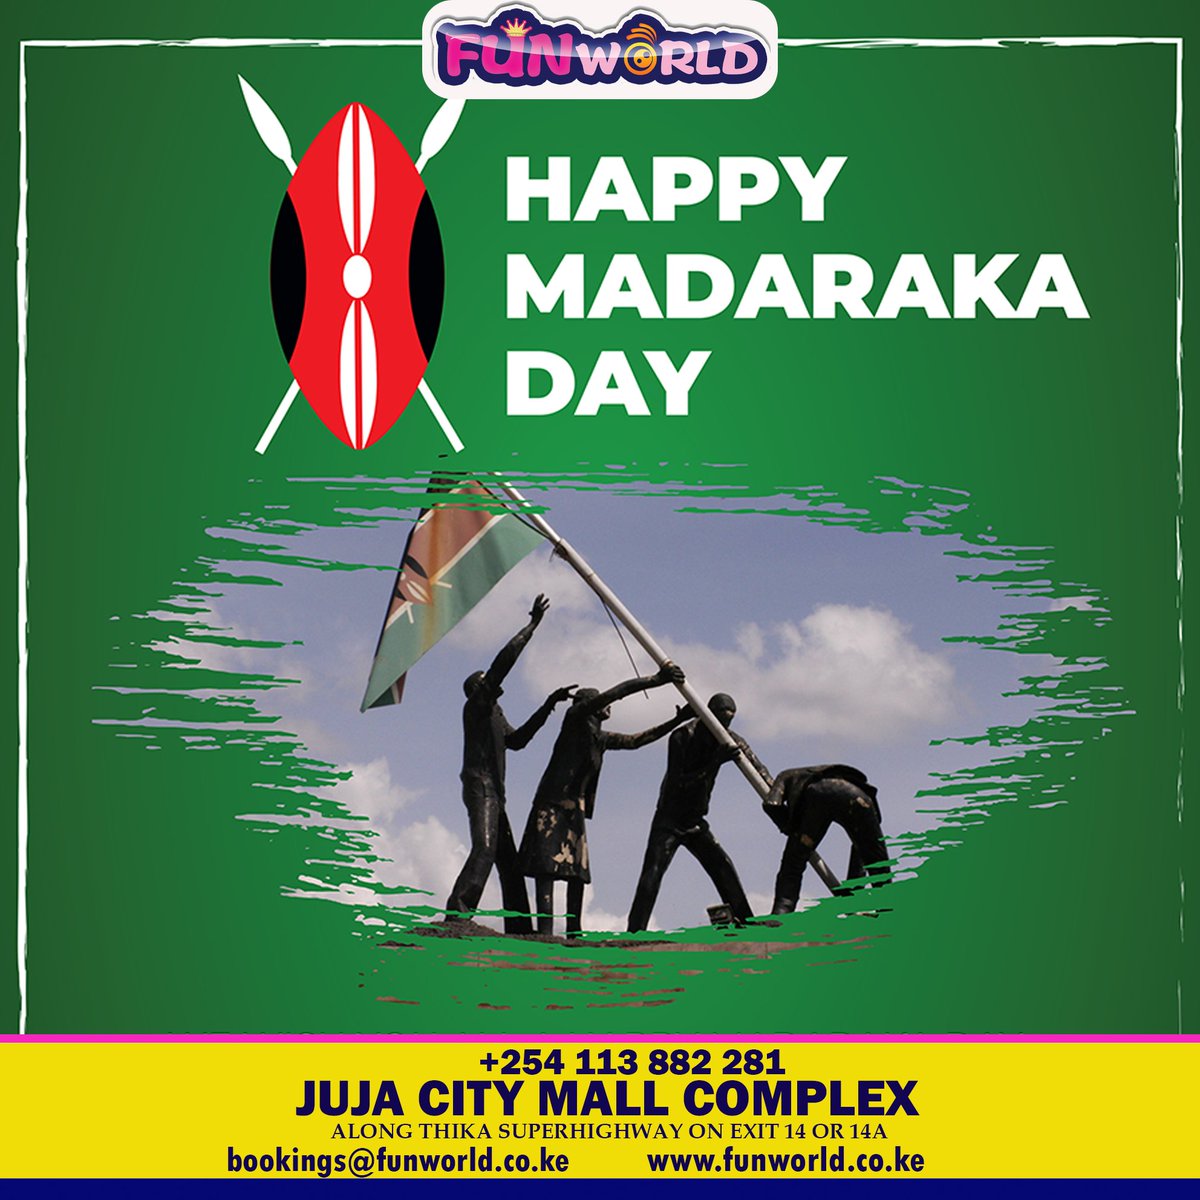 We have come along way and we are grateful for those who put their lives in the line for our freedom.

Contact us on +254 113 882 281.
Email: info@funworld.co.ke 
Website: funworld.co.ke 

#FunworldAmusementpark #TheFunworldExperience  #MadarakaDay2023